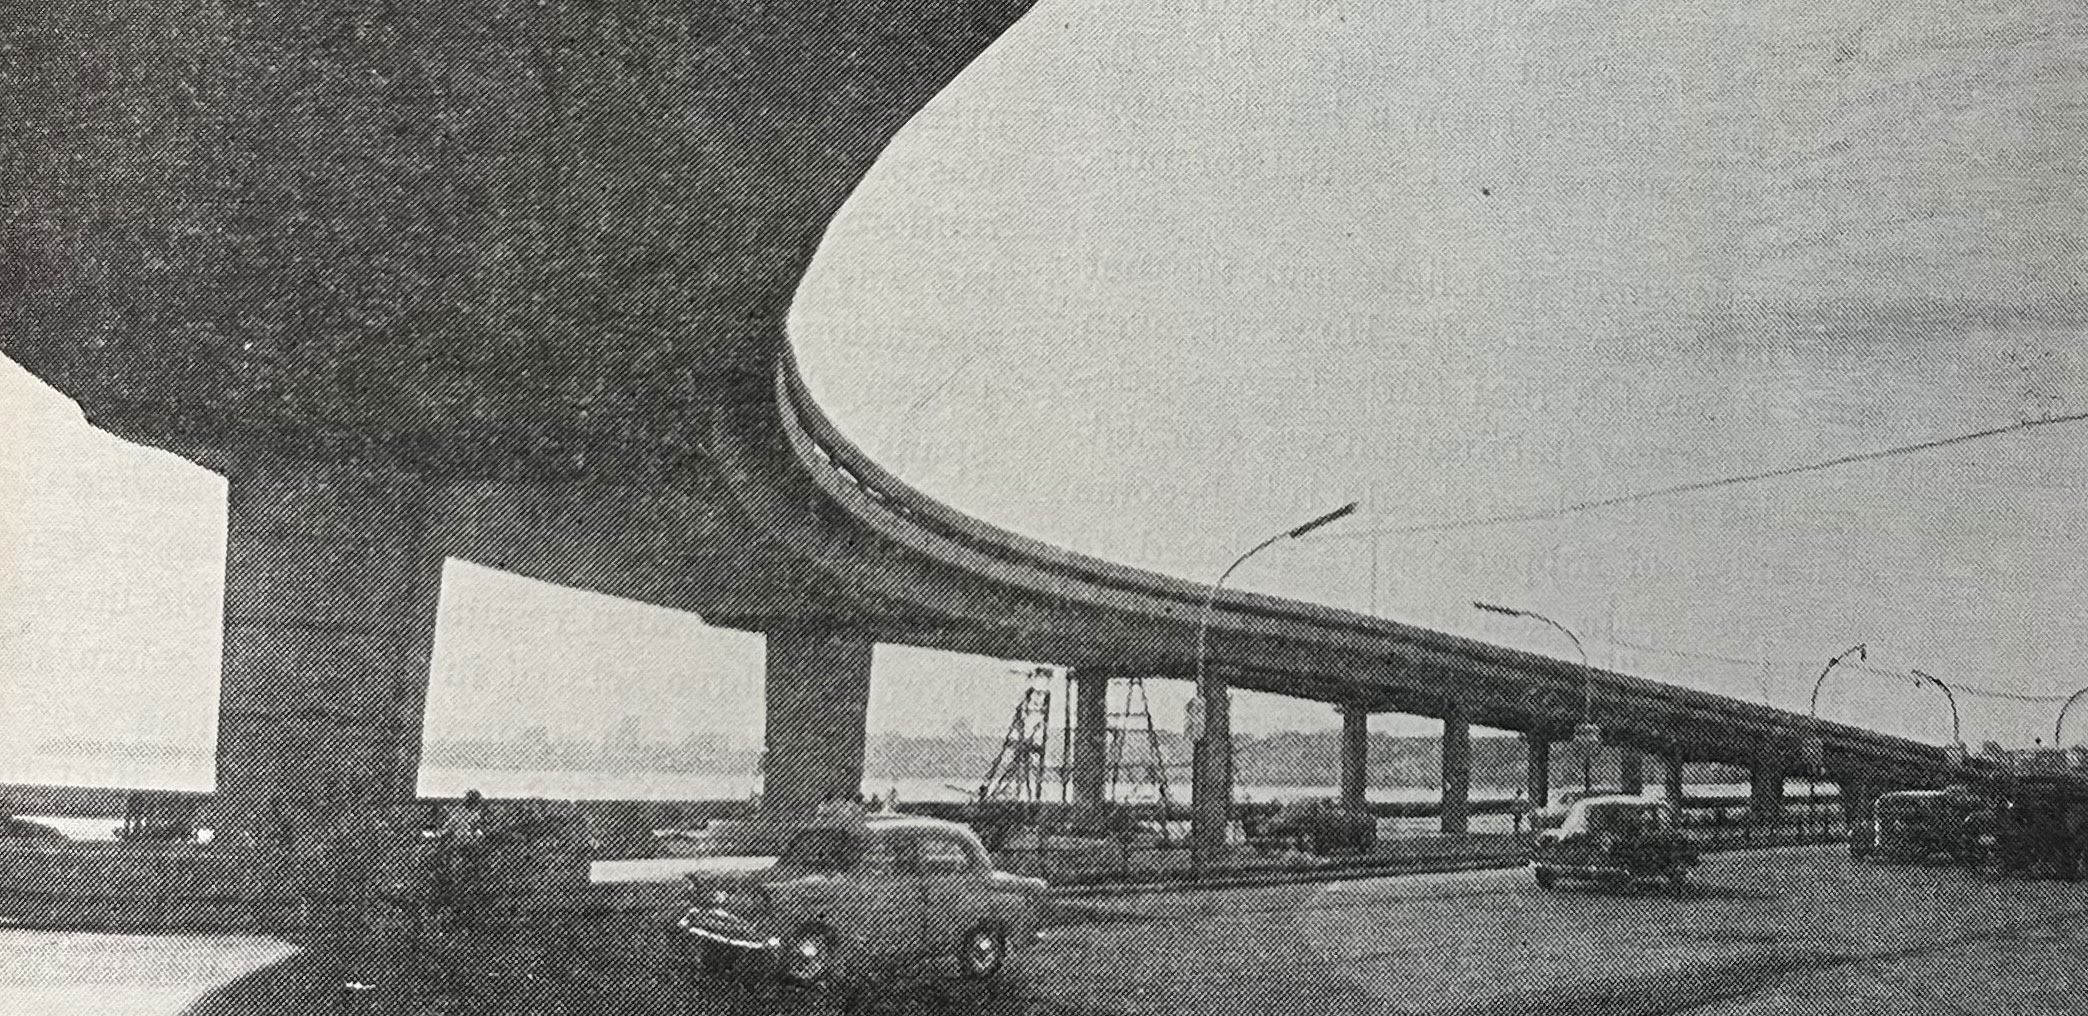 India’s Second Flyover,  opened in 1967 (C.R. Alimchandani, “The Princess St  Flyover,” Indian Concrete Journal, May 1968, 195.)